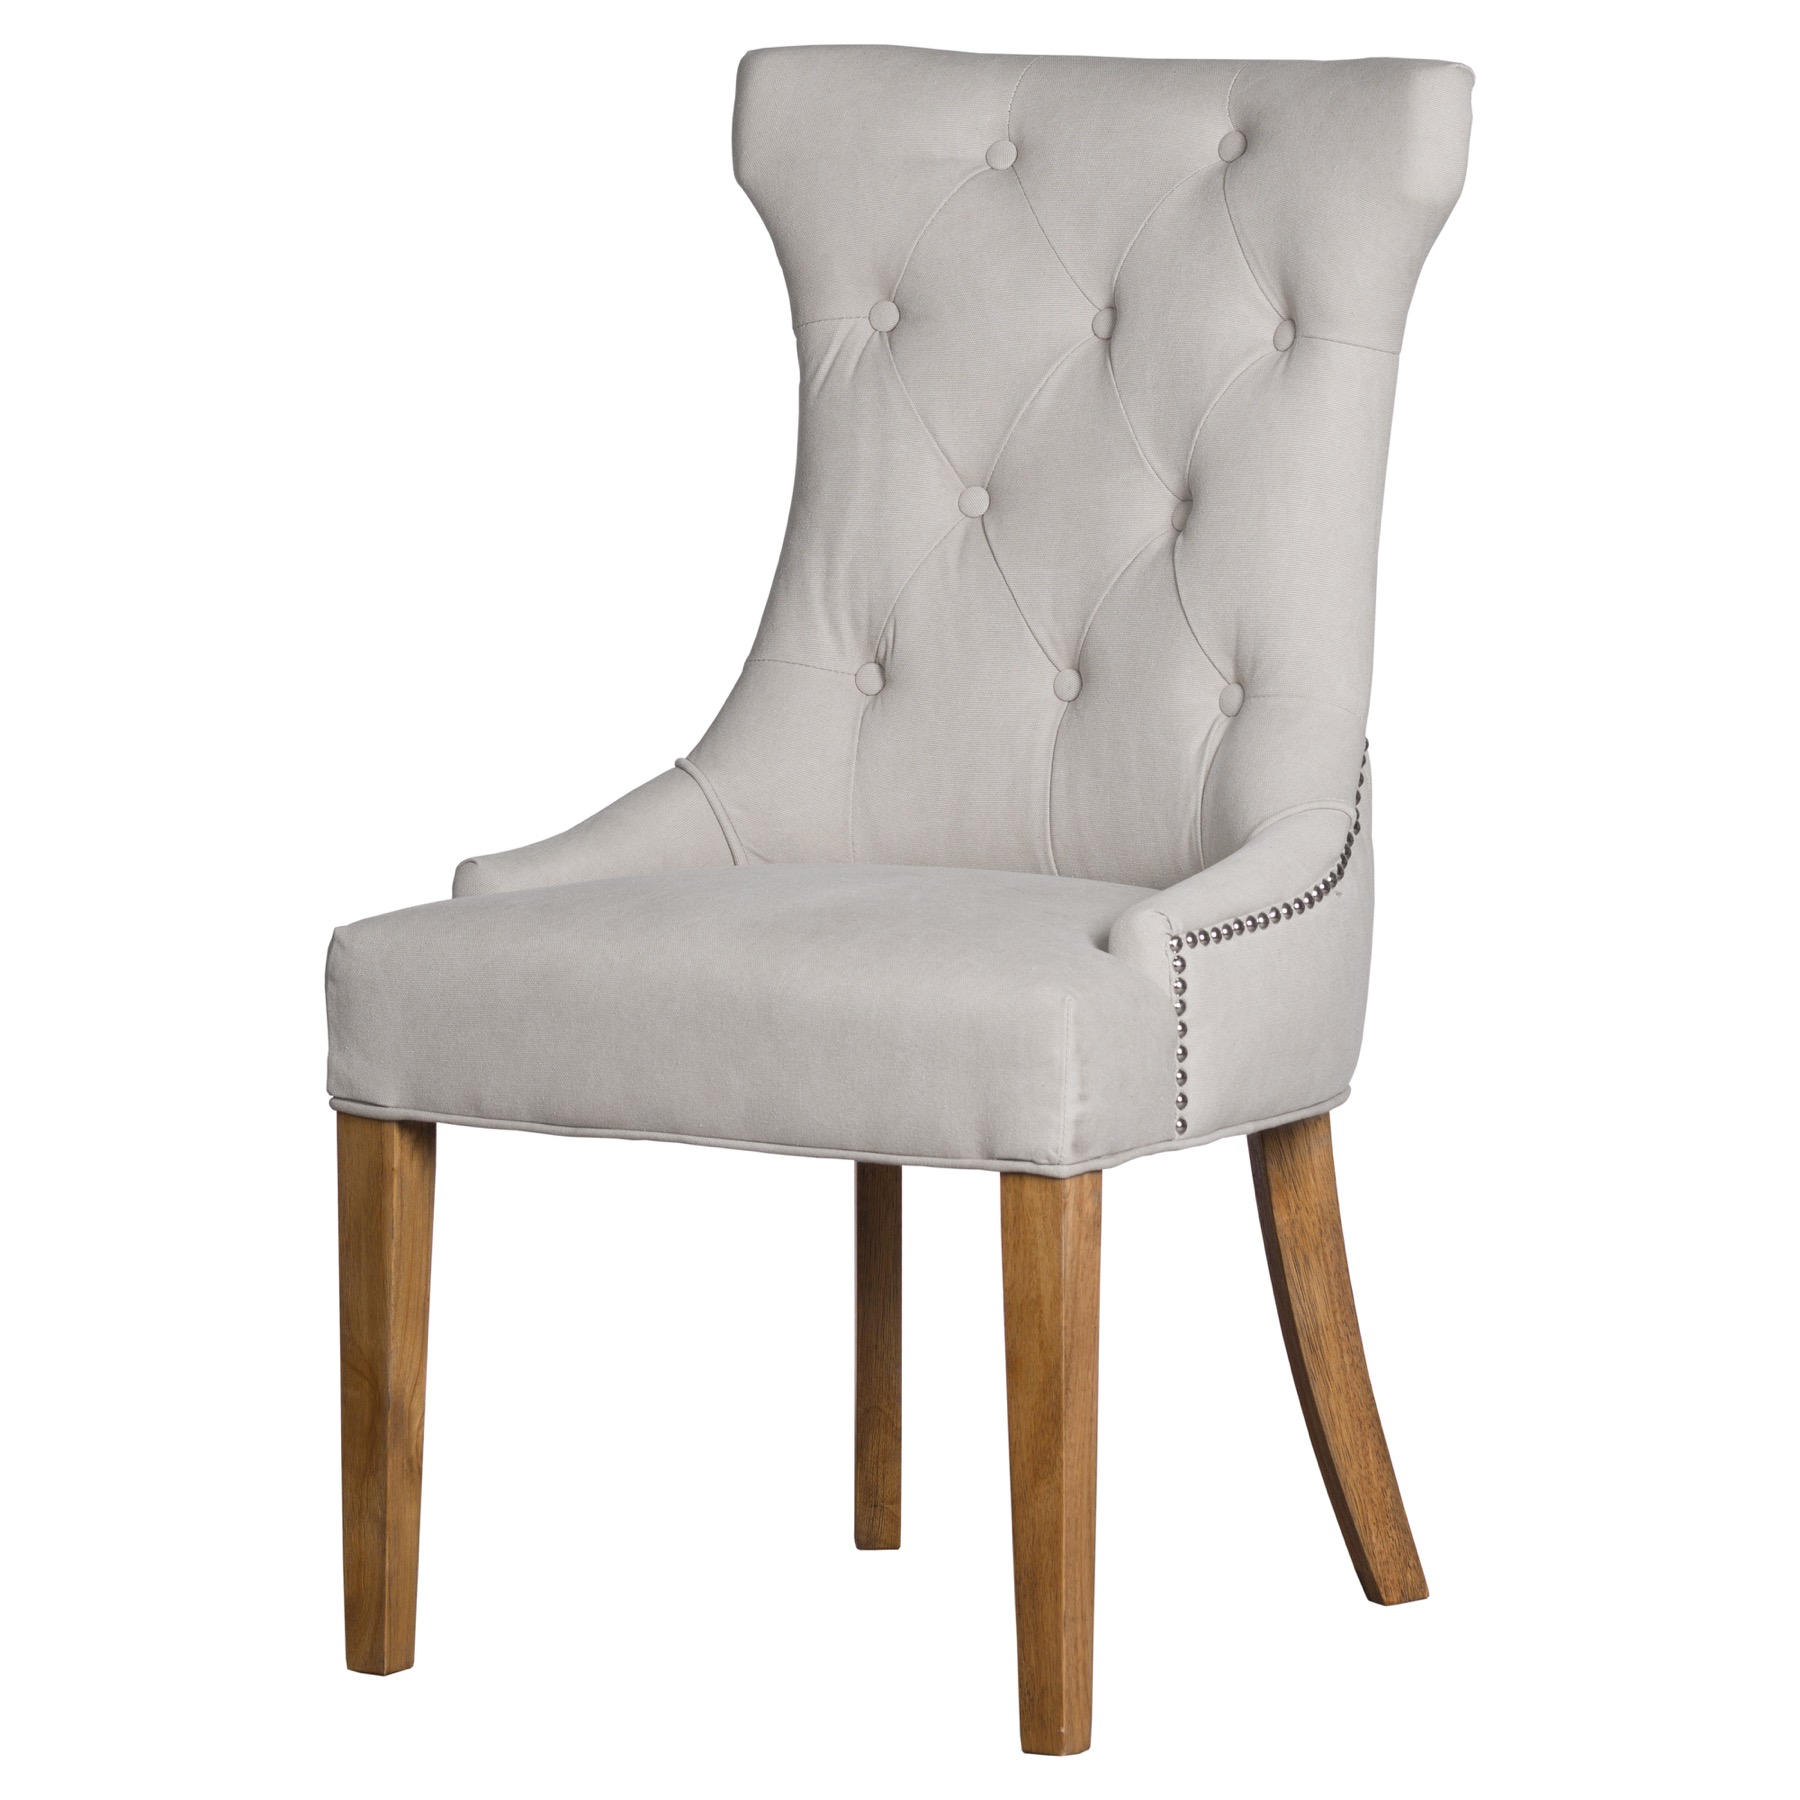 High Wing Ring Backed Dining Chair - Image 1